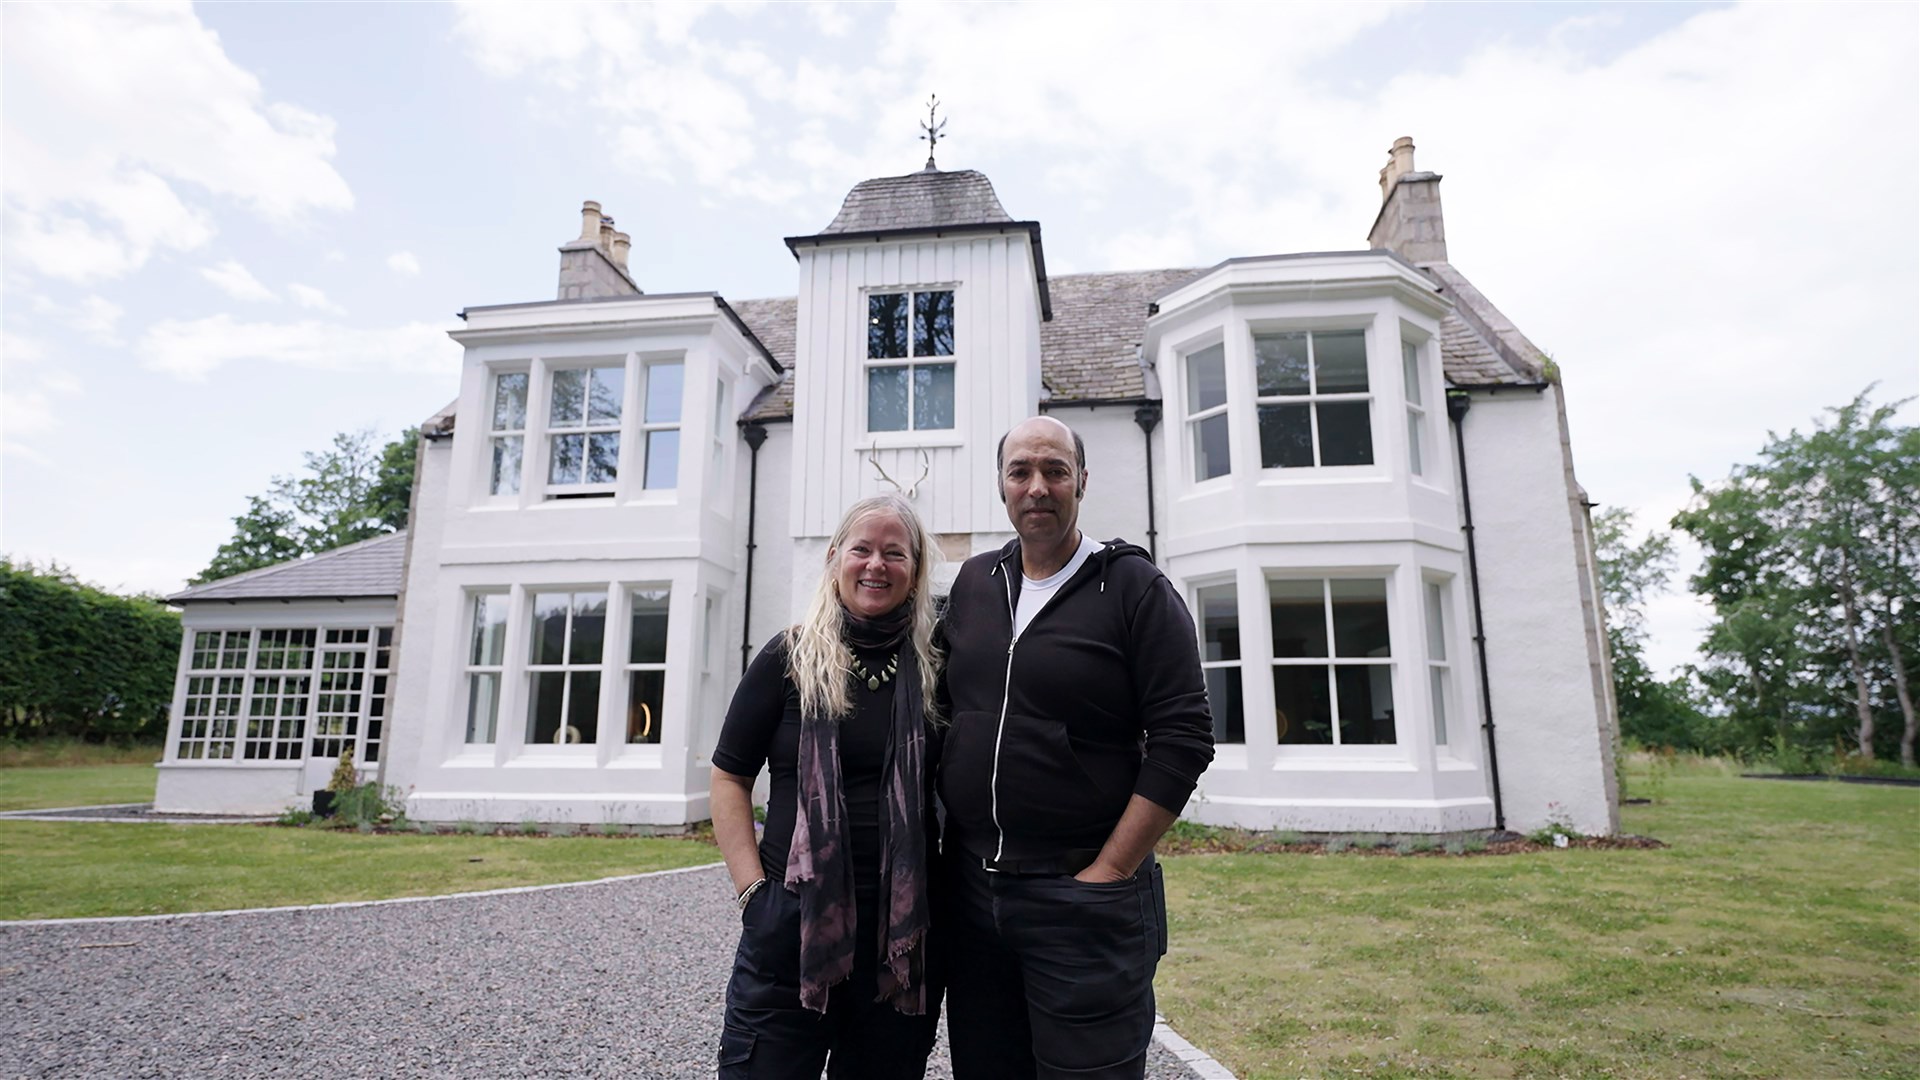 Dianne Dain and Salem Avan in front of the home which is in the running for Scotland's home of the year.